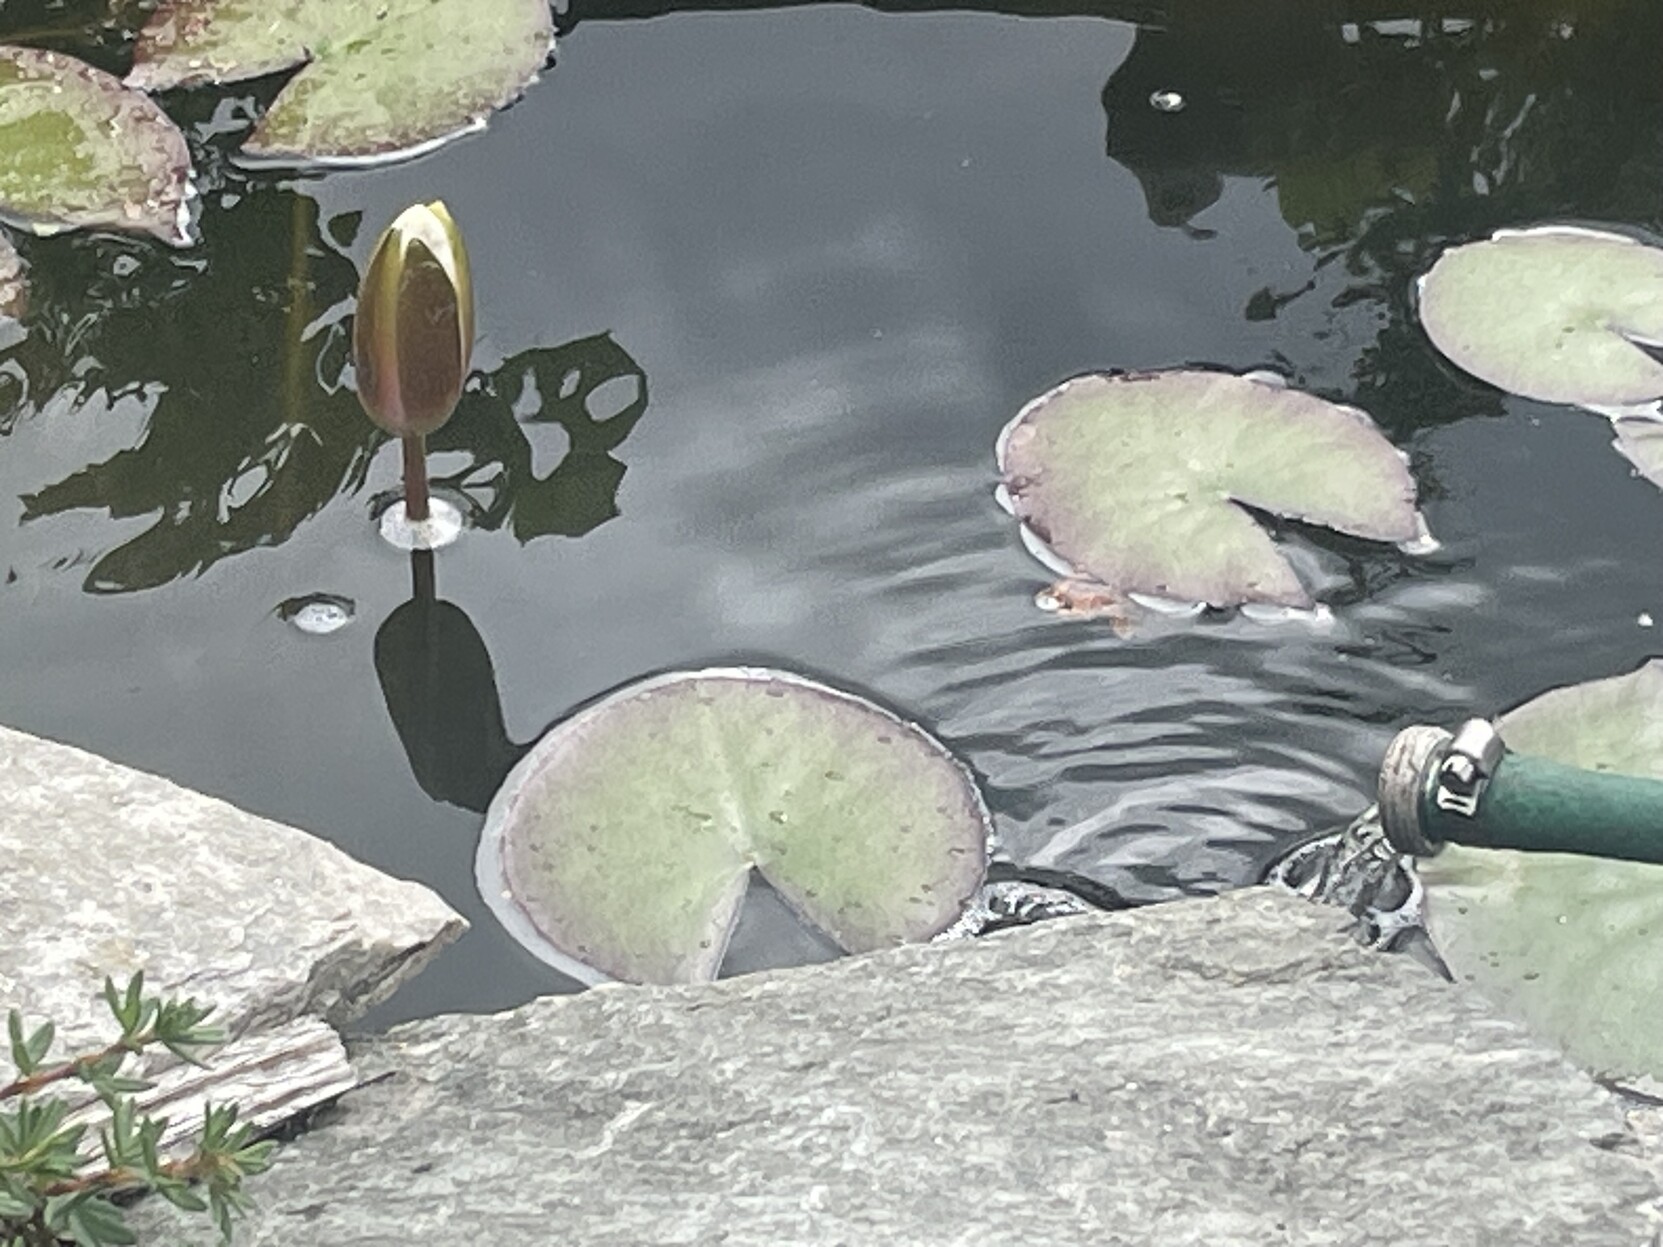 Water exits a small green hose into the pond in between two lilly pads. The flower is above the water by about 5cm.